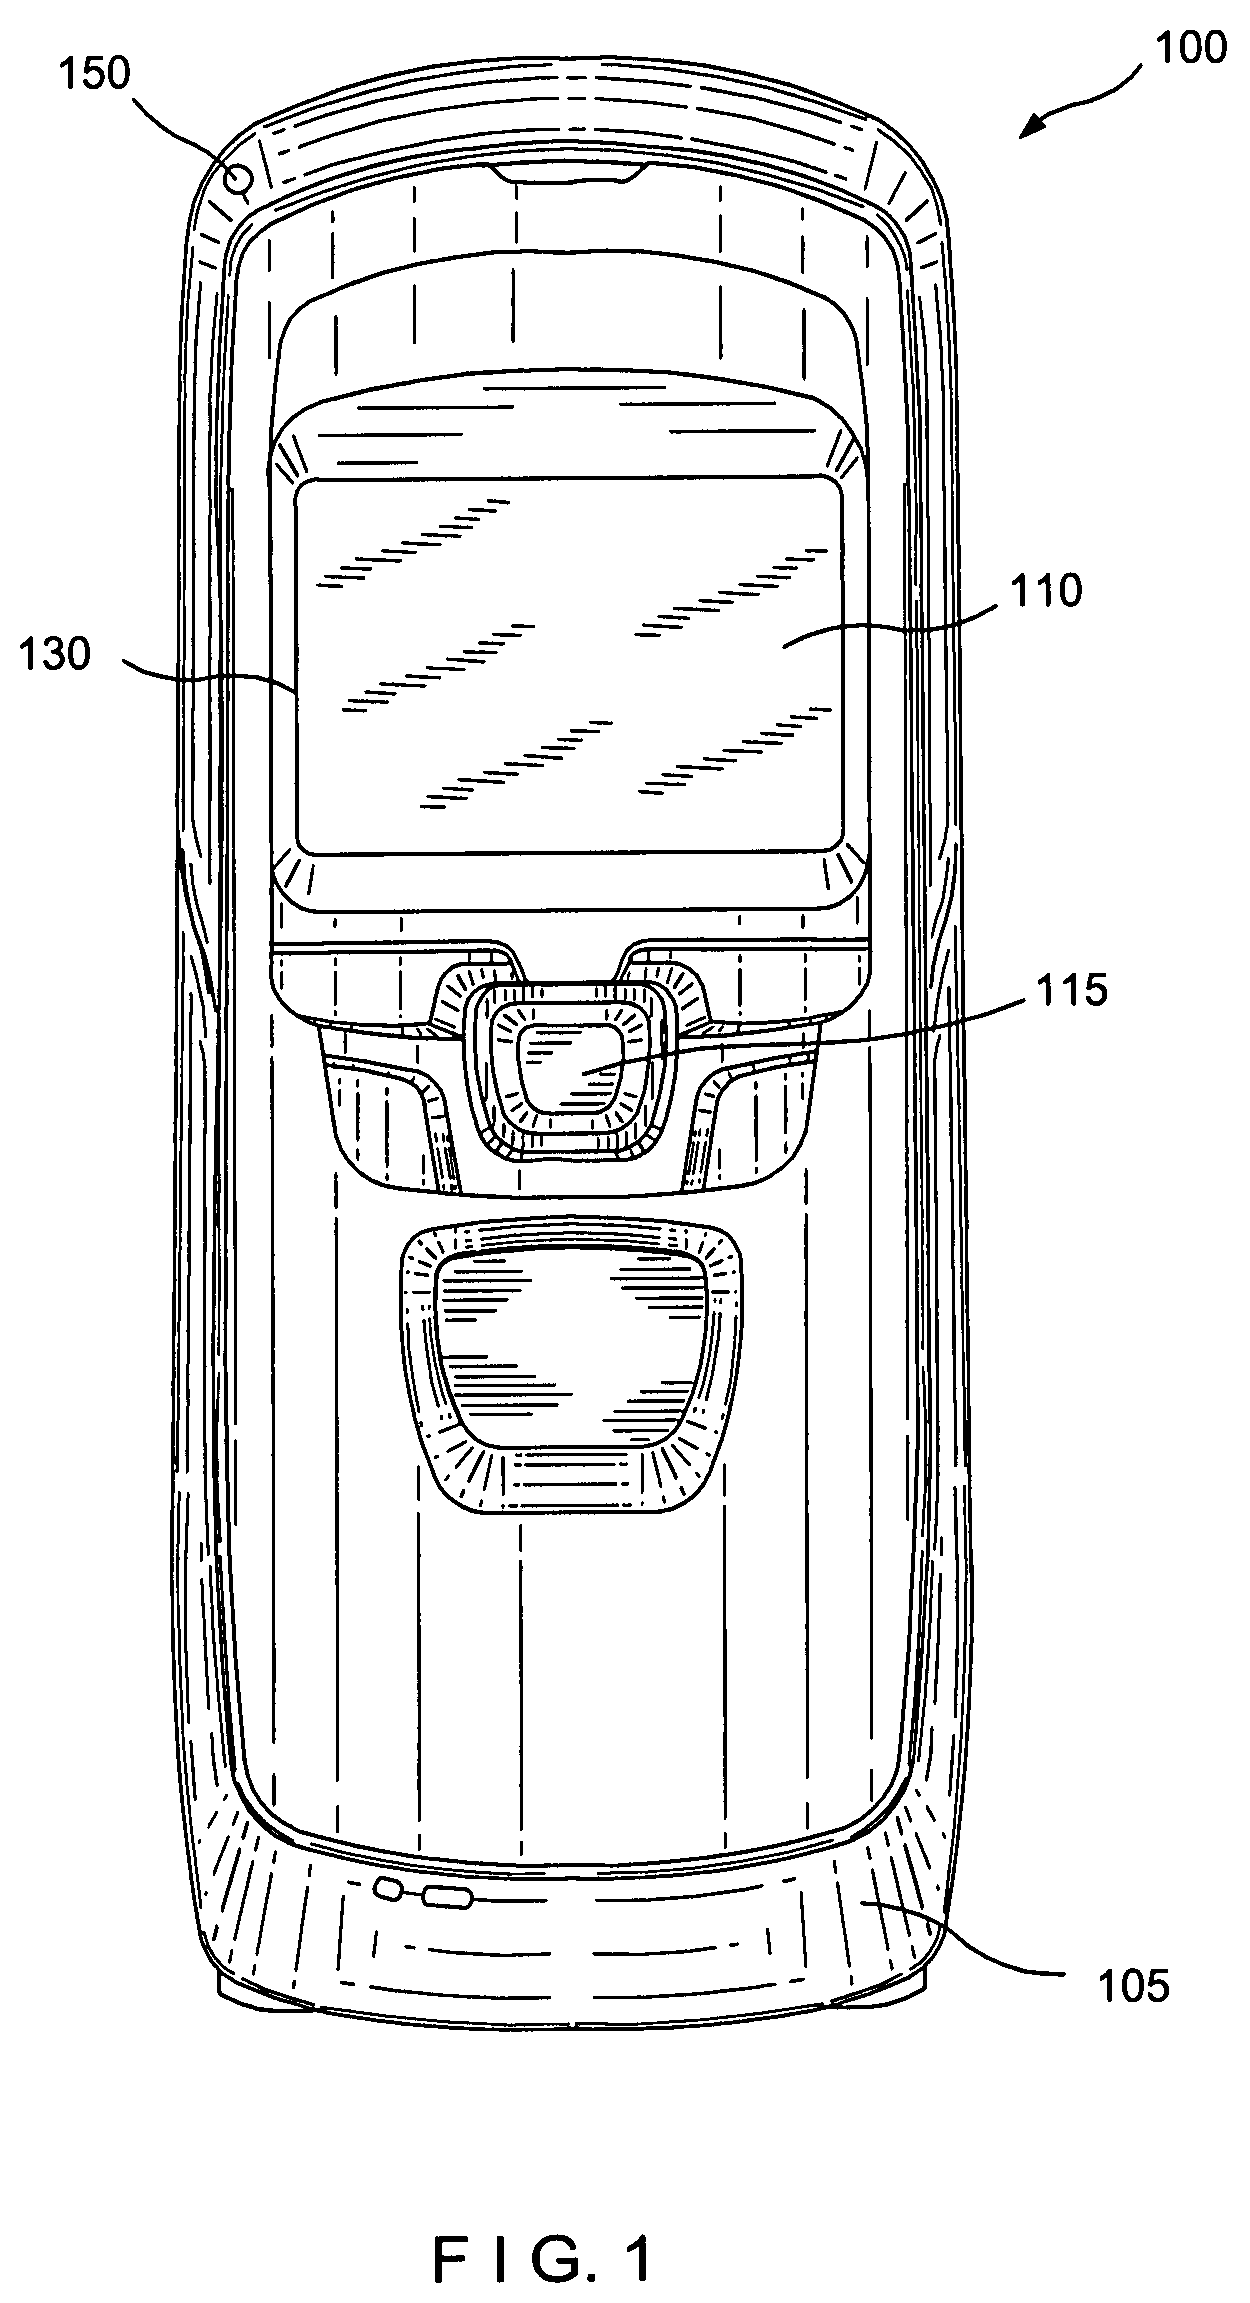 System and Method for Optimized Visualization on a Display Window